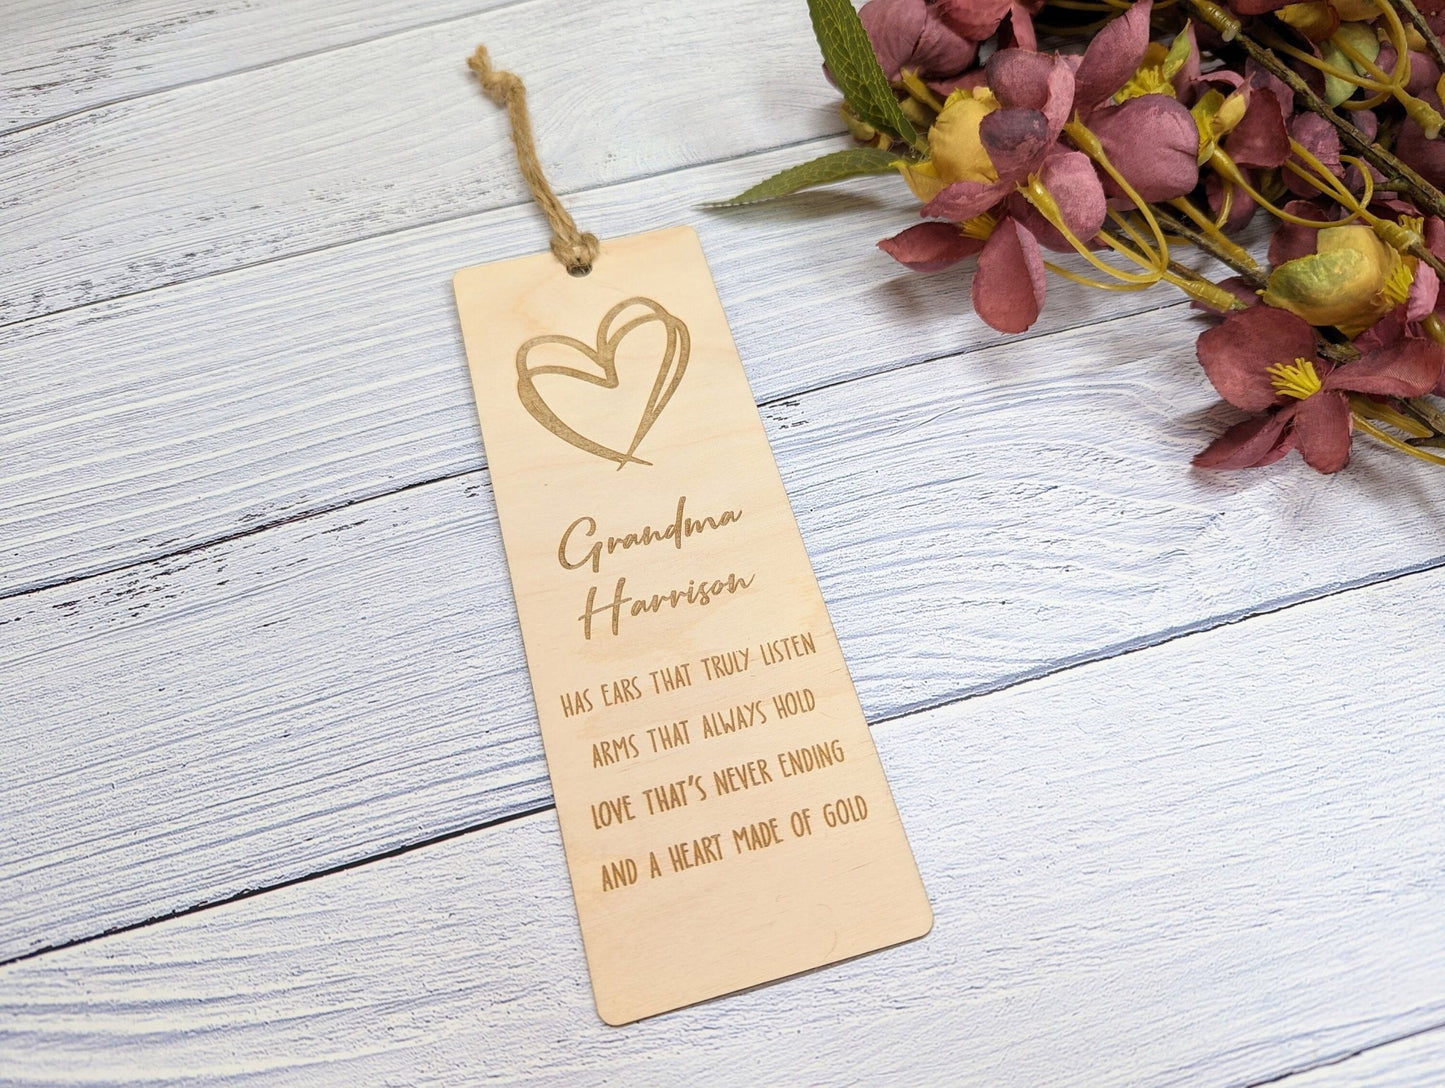 Personalised Wooden Bookmark for Grandparents with Poem - Unique Gift for Gran, Grandad, Nana, and More - CherryGroveCraft